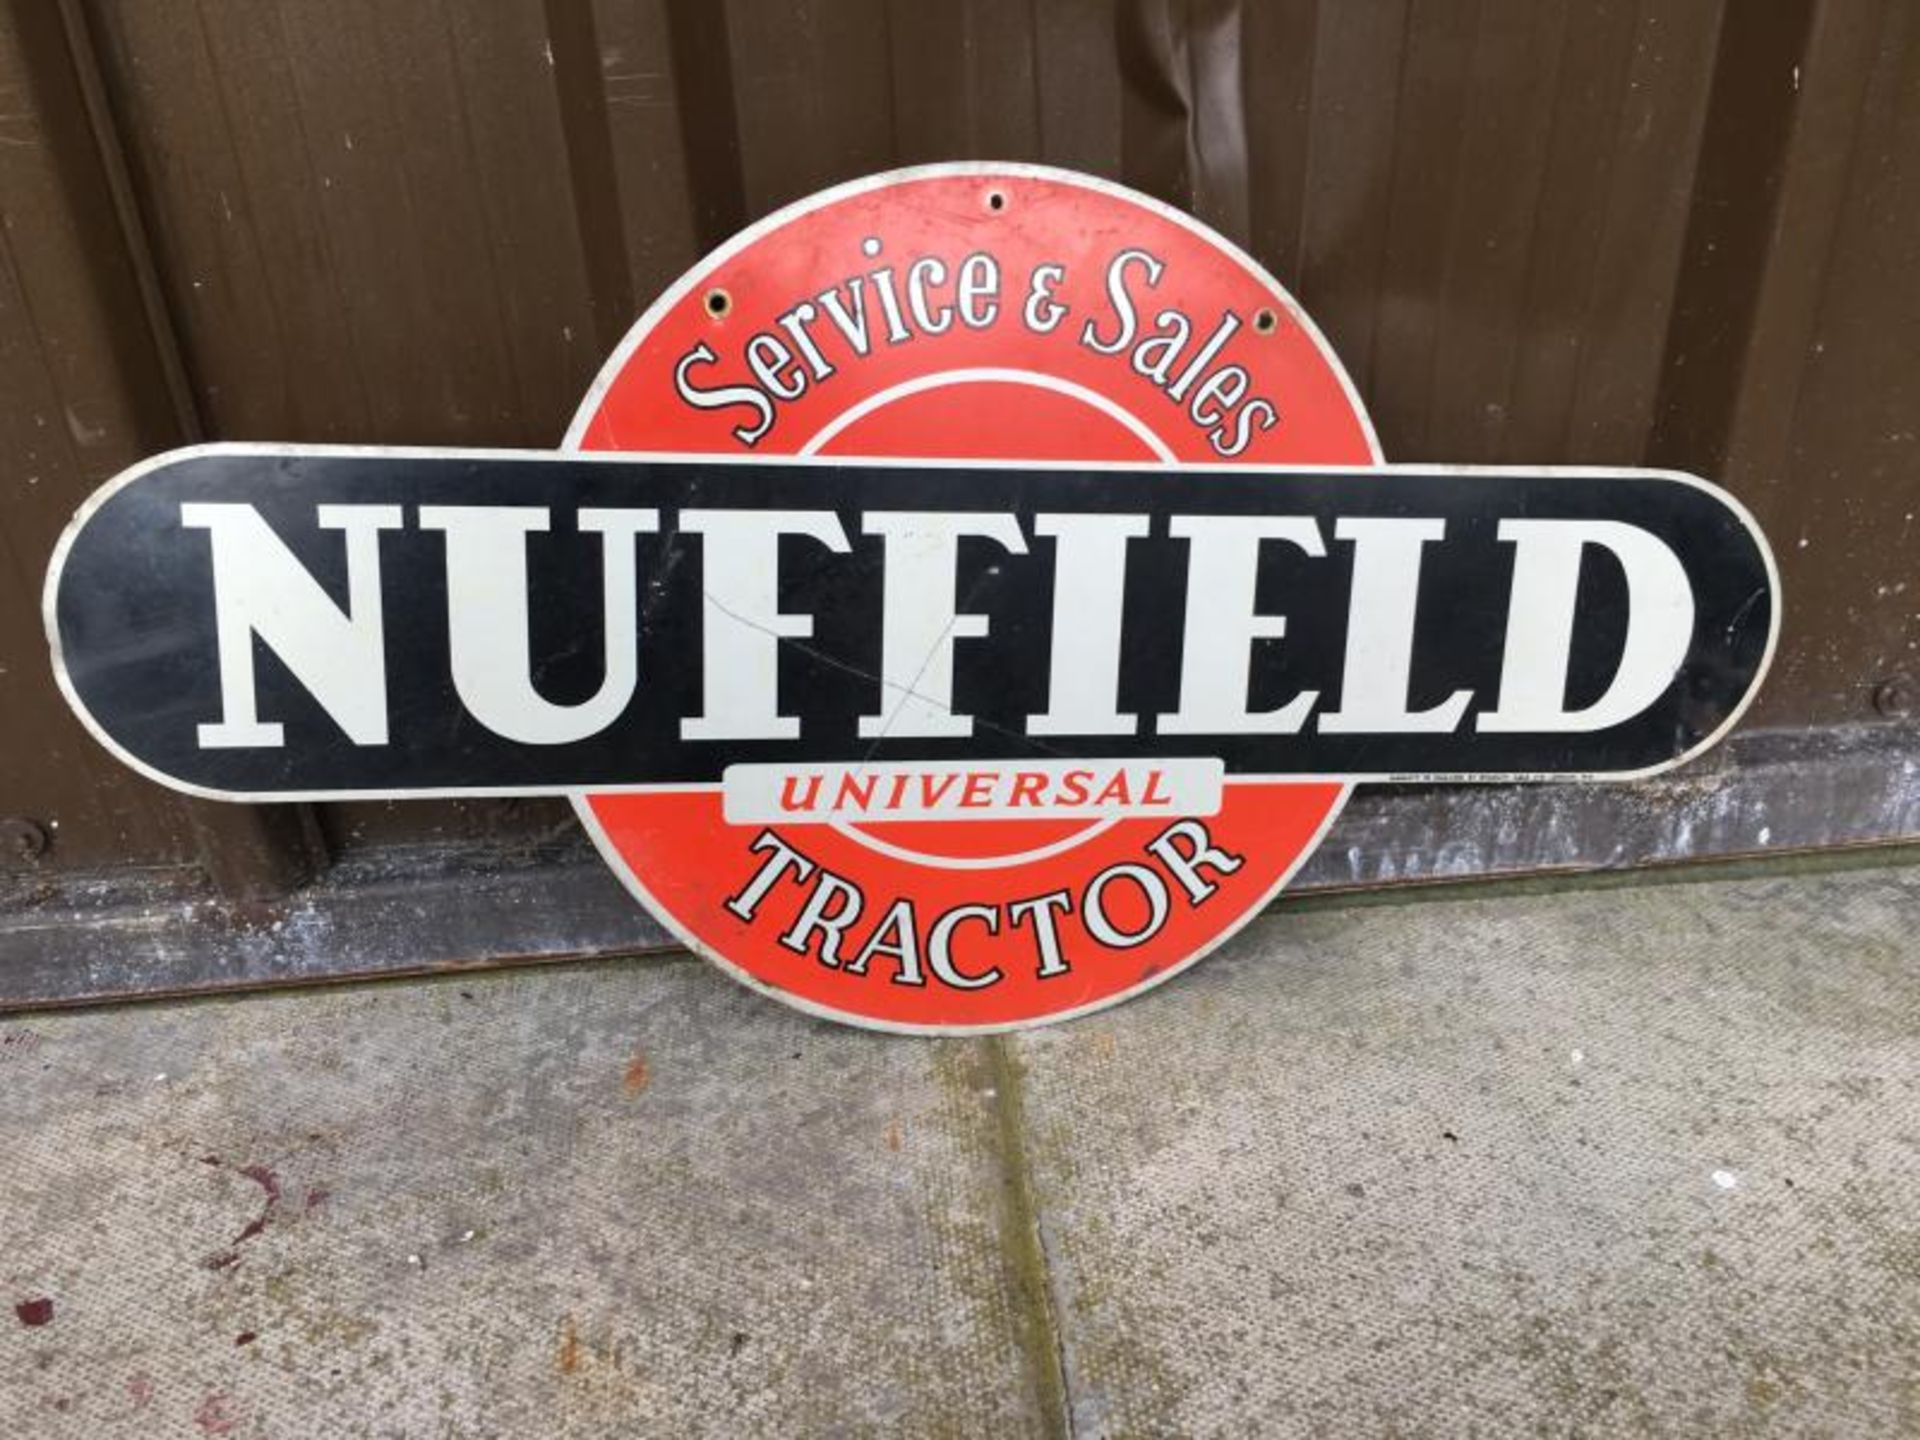 Nuffield double sided tractor sales & service sign - Image 2 of 2